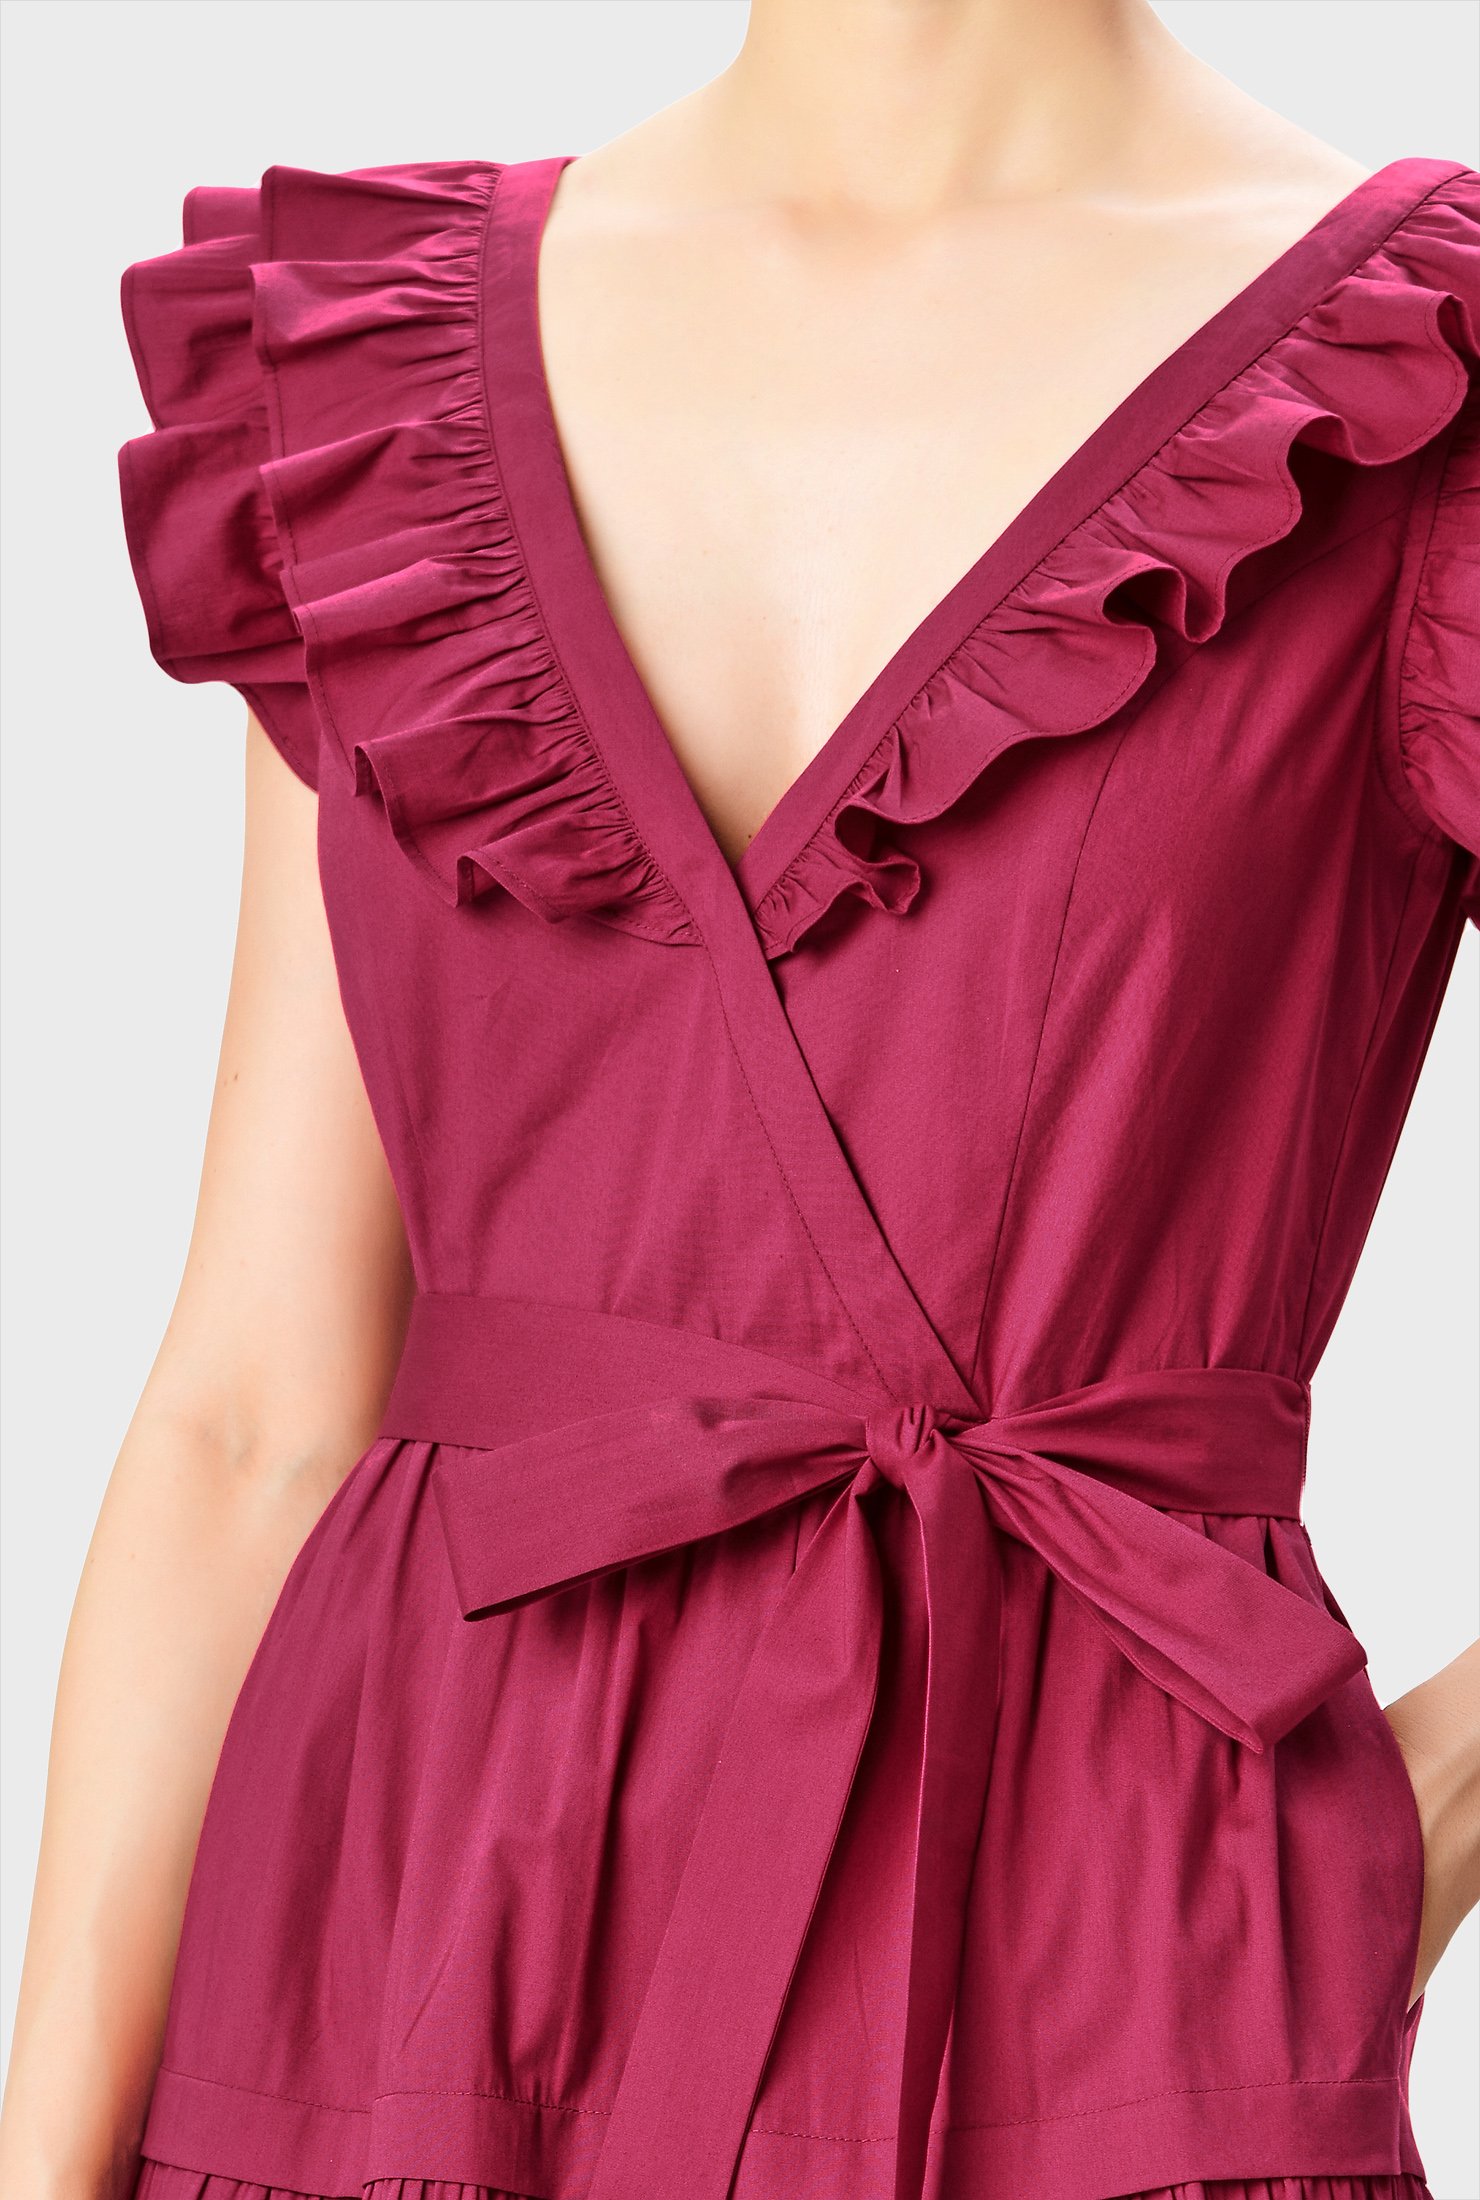 Ruched tiers form the flirty skirt of our cotton poplin dress that's textured with ruffles at the neckline and sleeves.